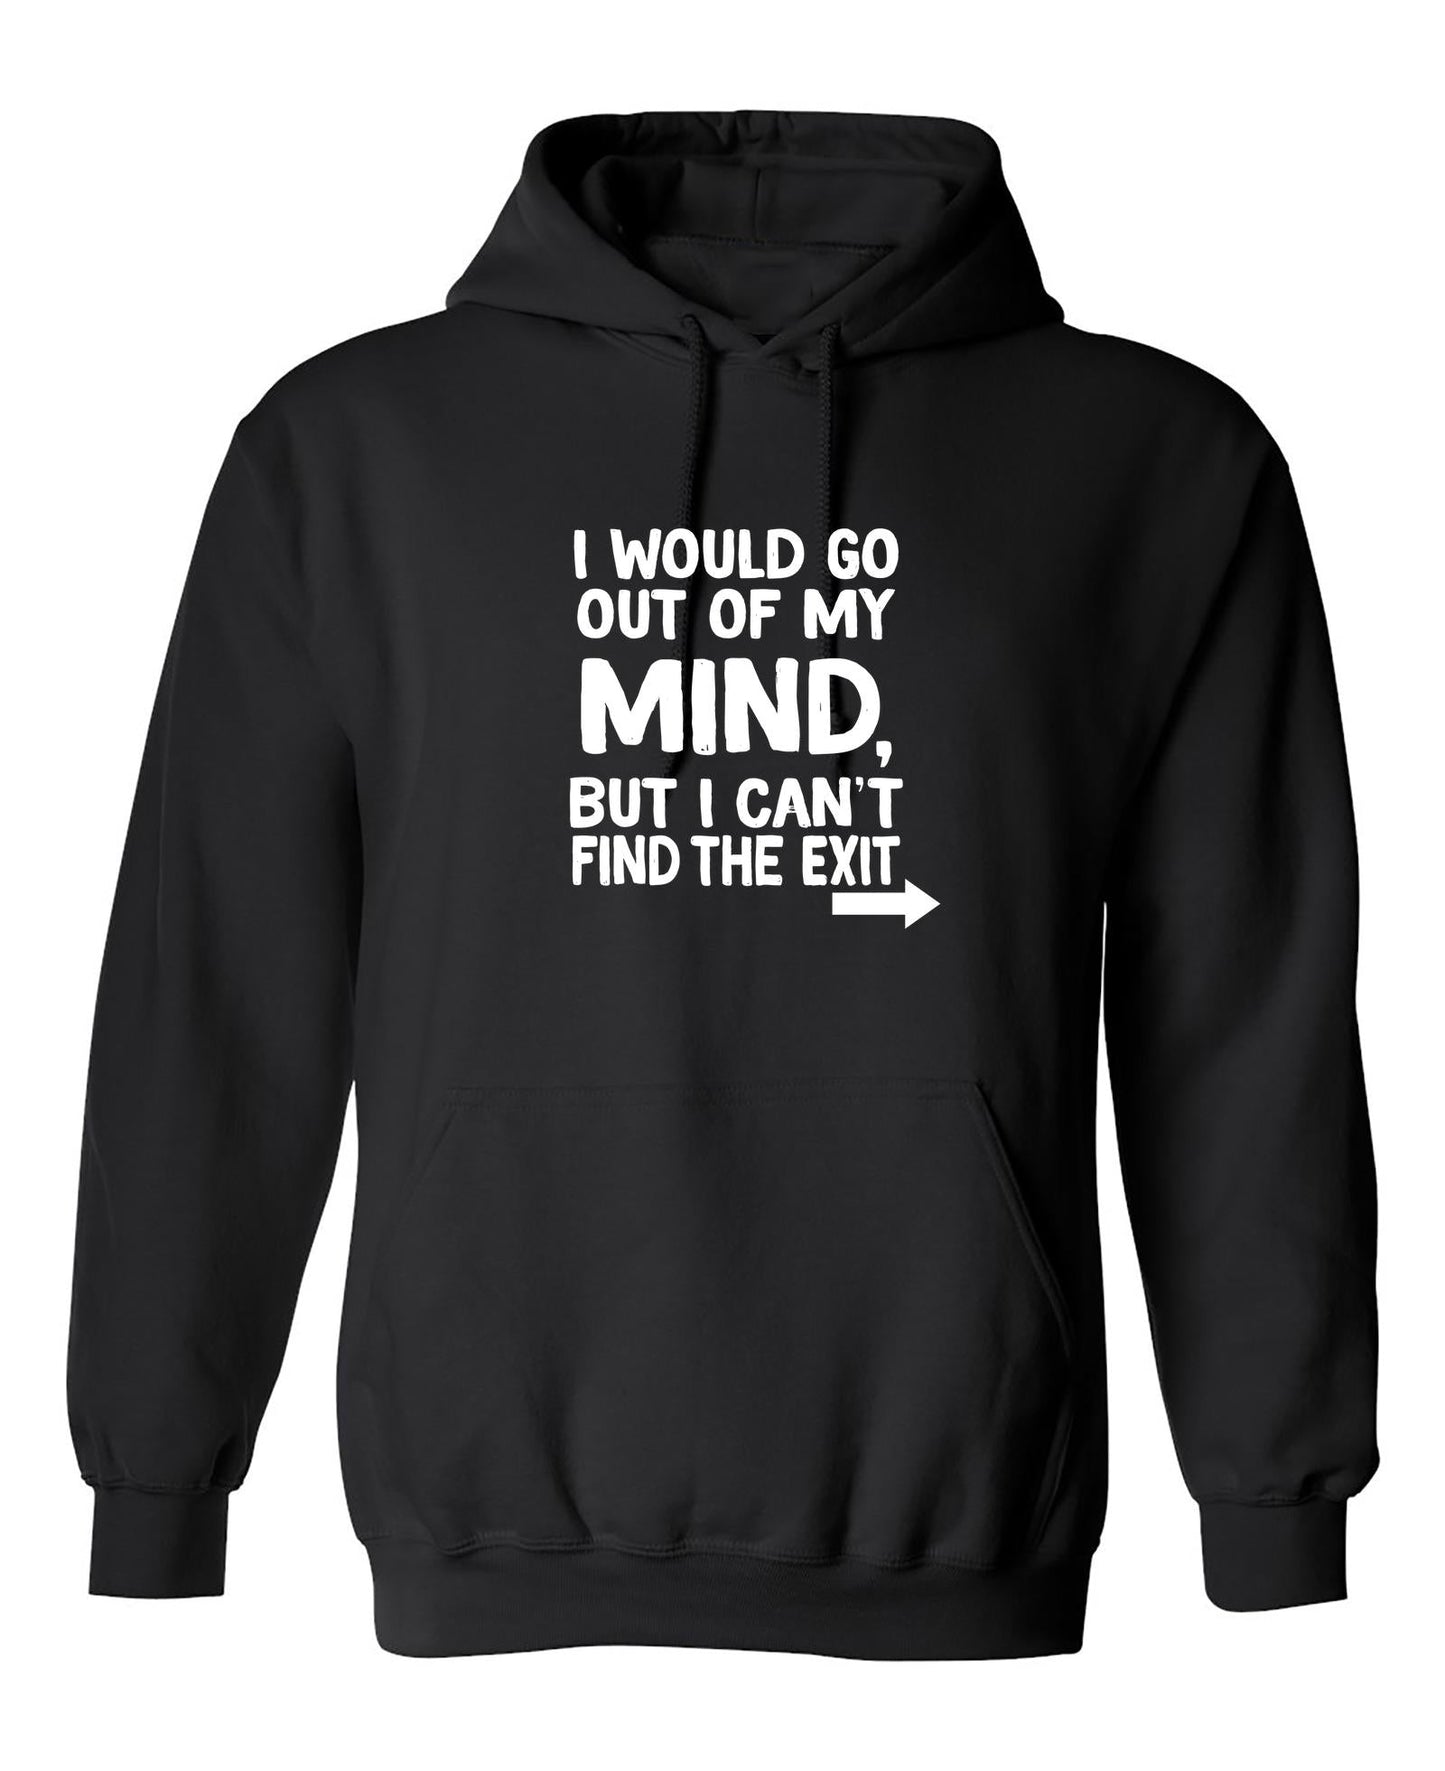 Funny T-Shirts design "I would go out of my mind but I can't find the exit"